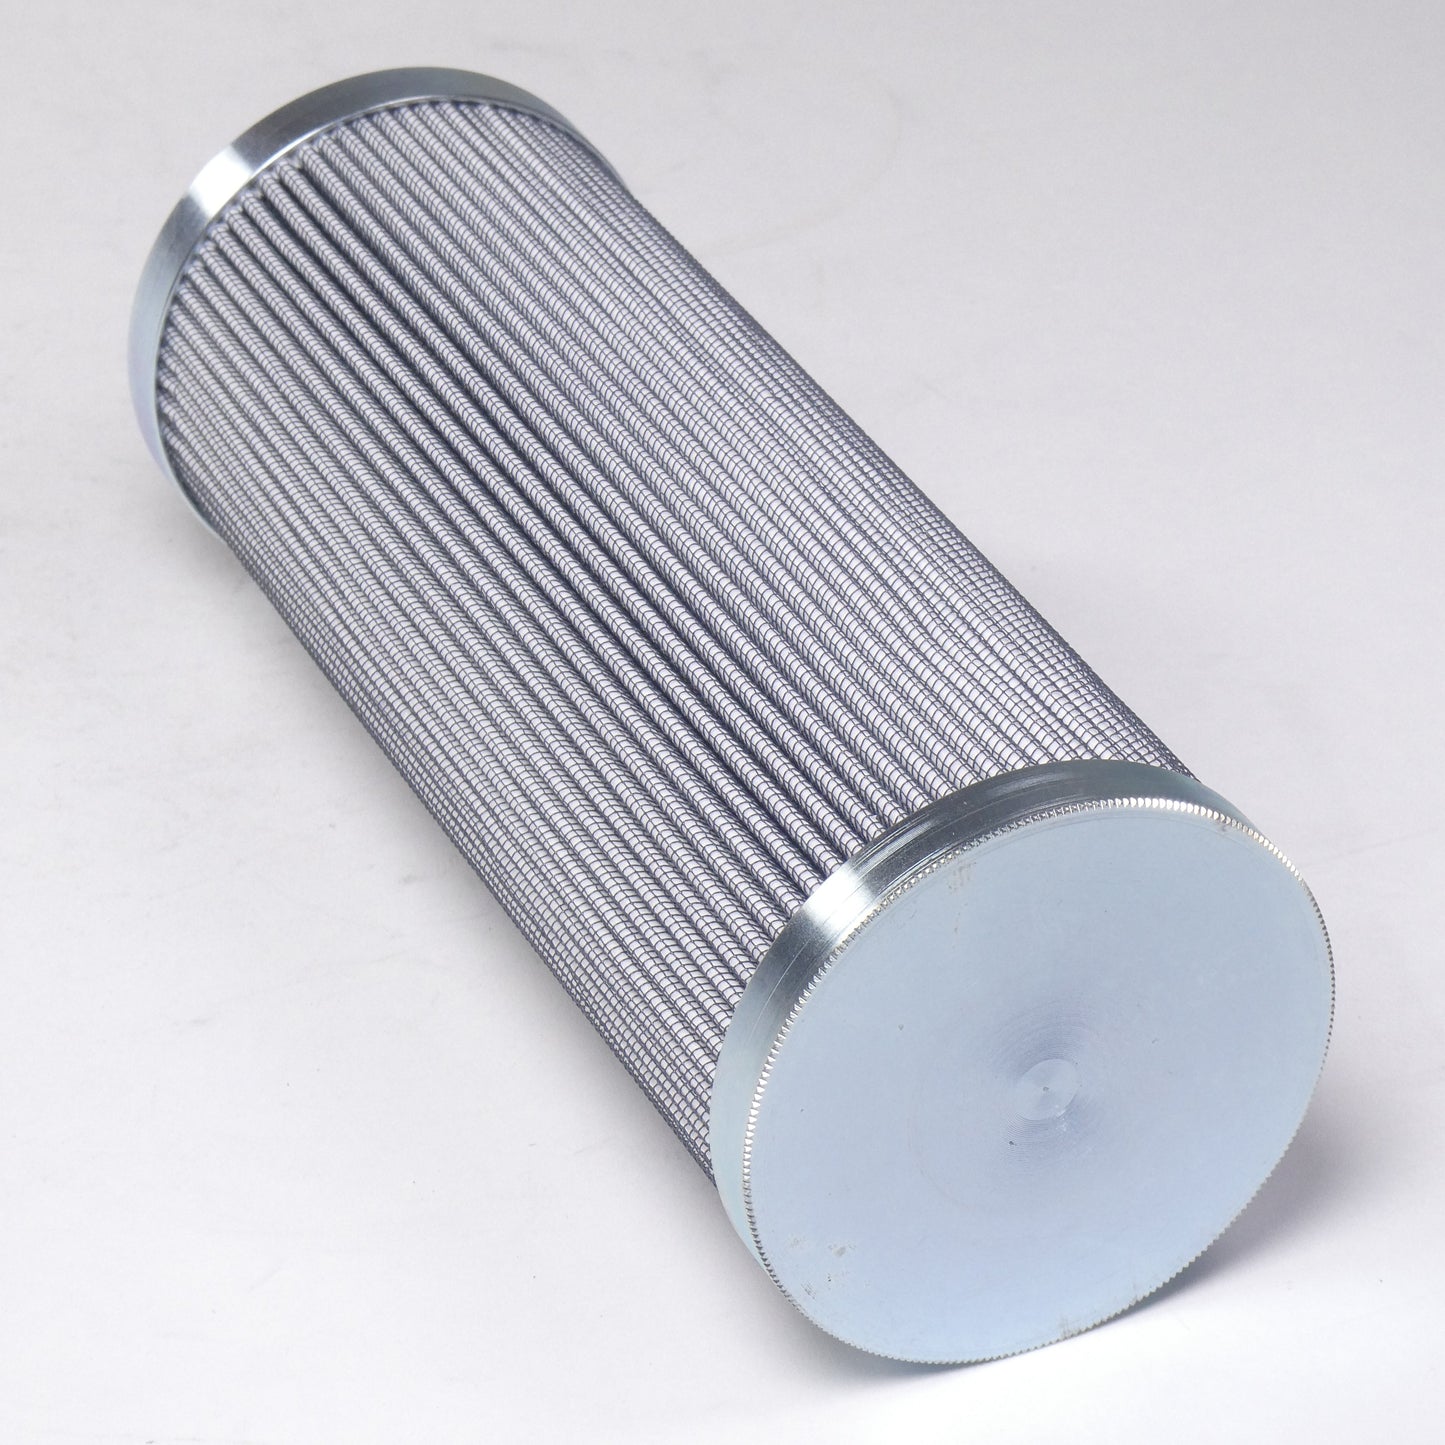 Hydrafil Replacement Filter Element for Hydac 1.11.04D03BH